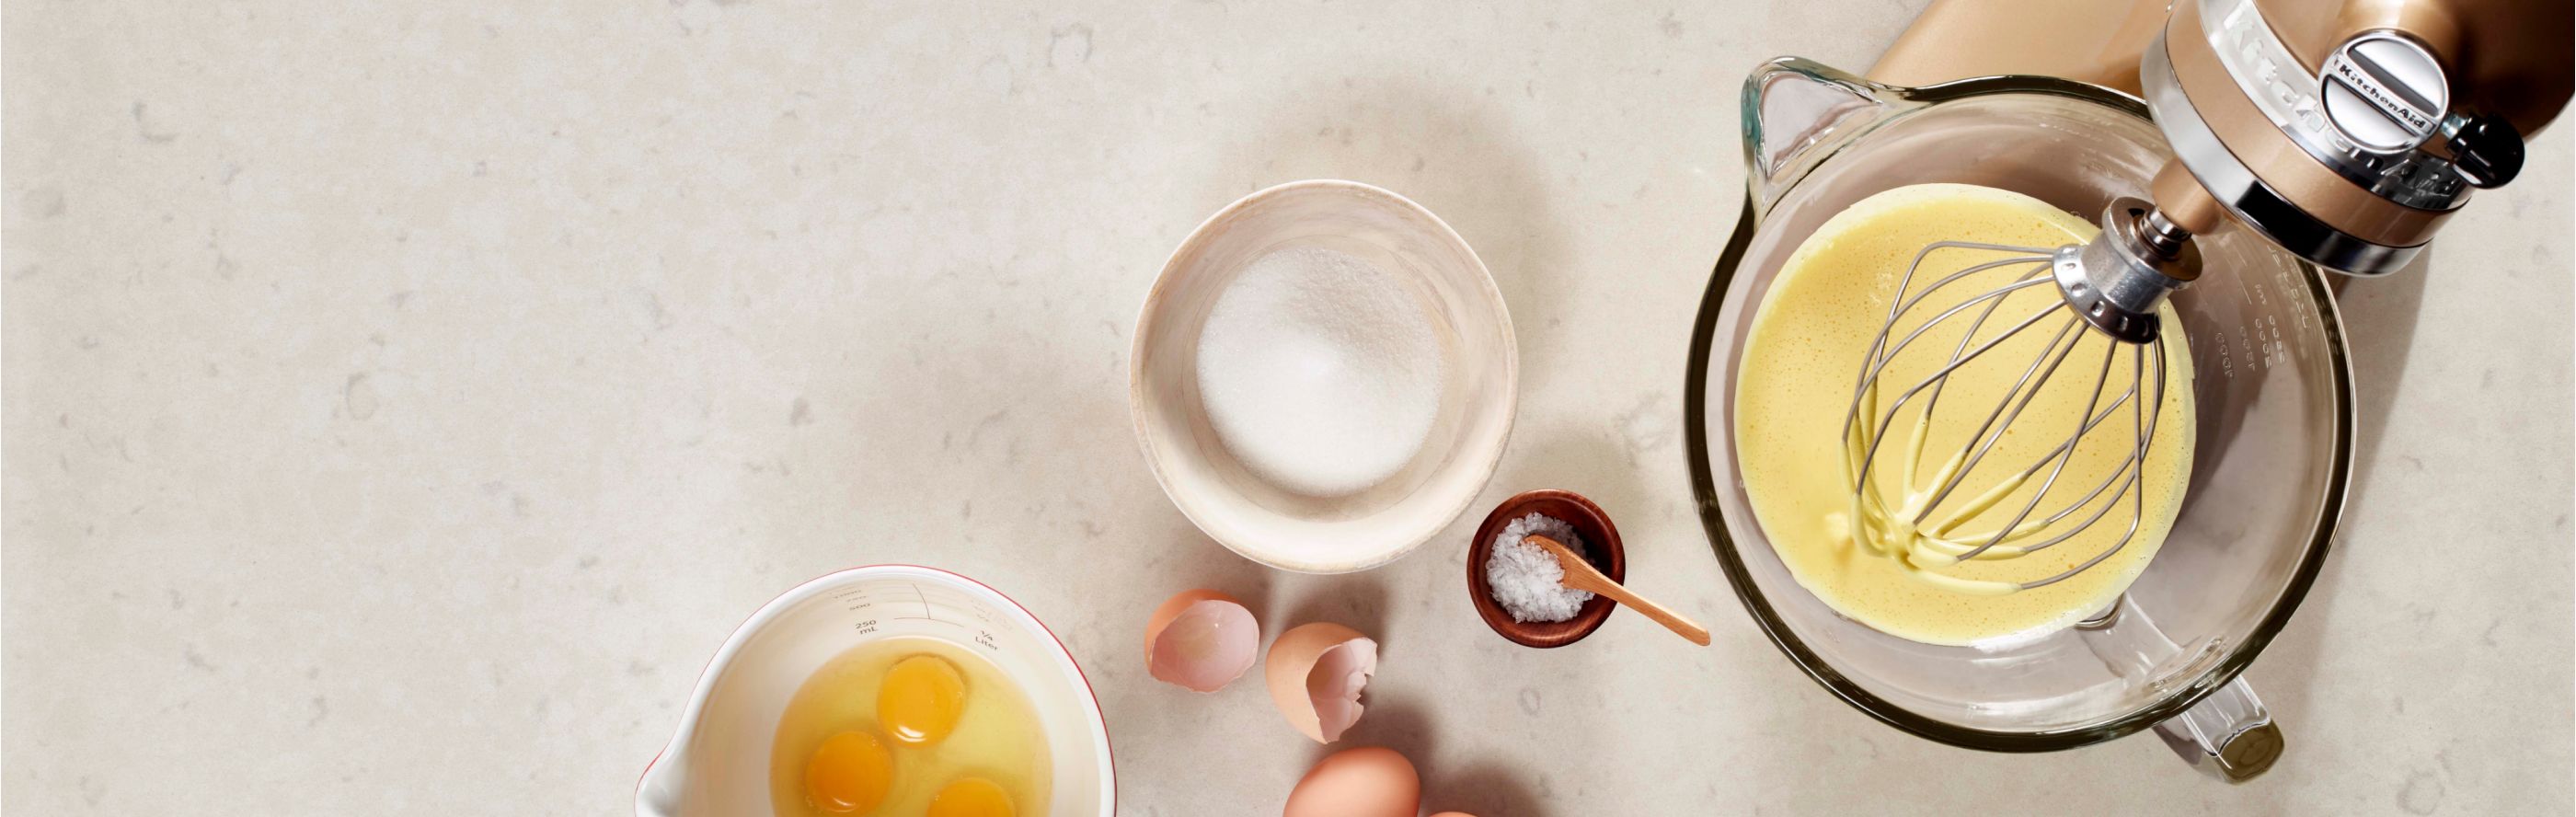 KitchenAid® stand mixer with whipped egg whites in the mixing bowl next to a bowl of cracked eggs and salt.